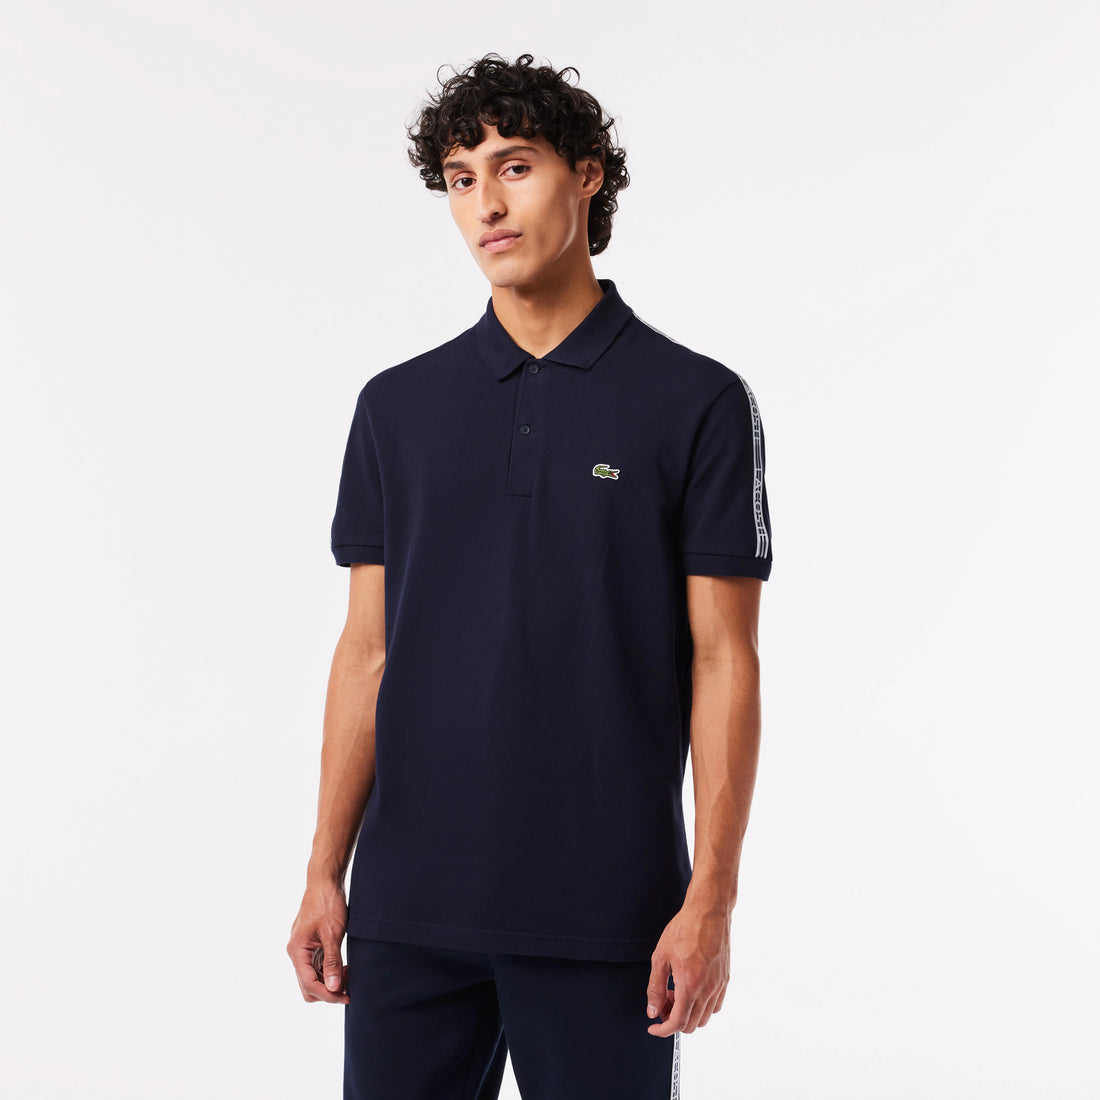 Lacoste PH5075-51 Regular Fit Lifestyle Polo Shirt [Navy Blue]